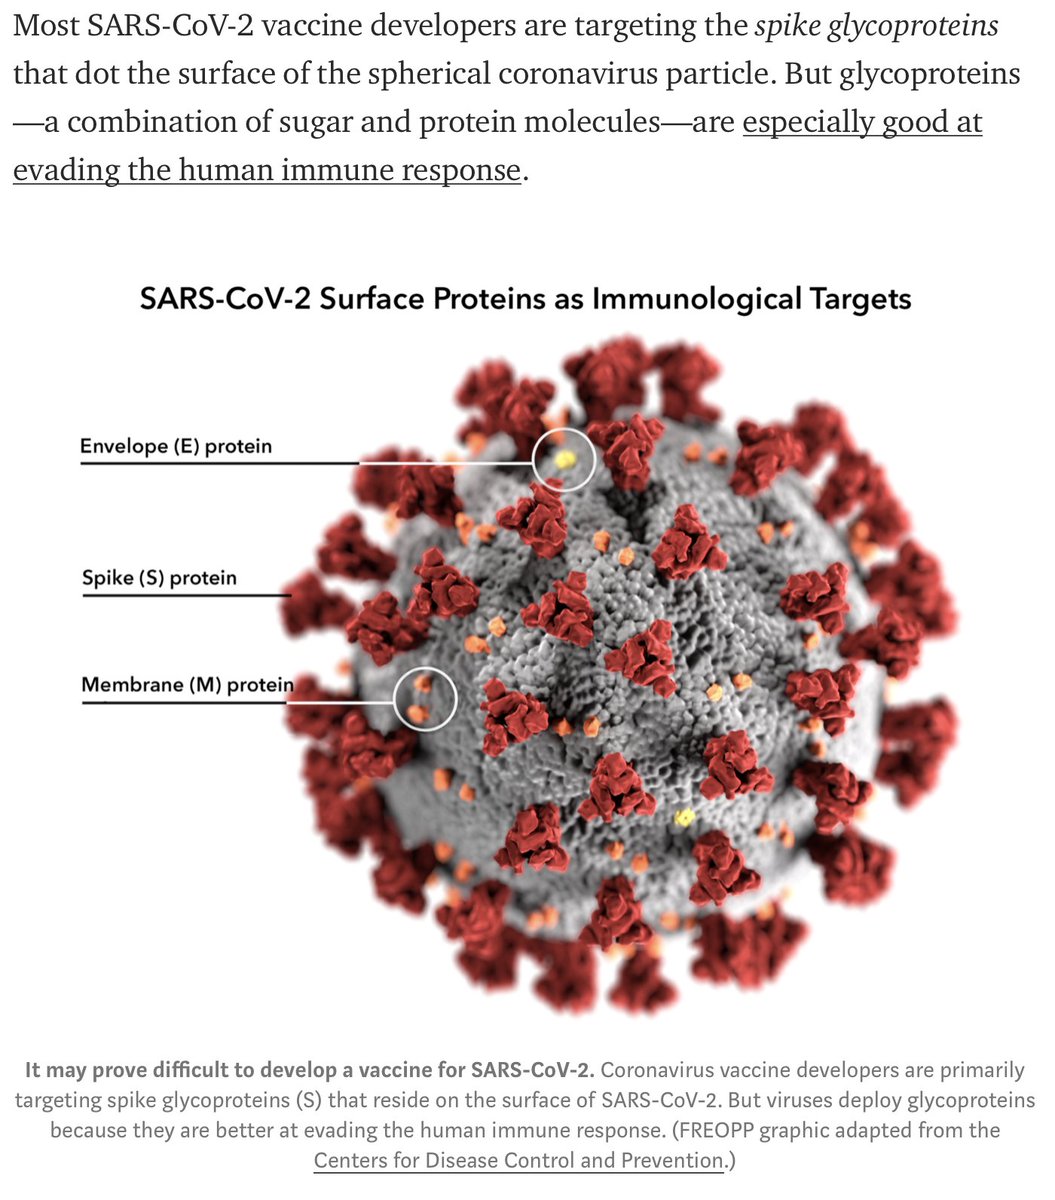 As we explain, "most SARS-CoV-2 vaccine developers are targeting the spike glycoproteins that dot the surface of the spherical coronavirus particle. But glycoproteins—a combination of sugar and protein molecules—are especially good at evading the human immune response."